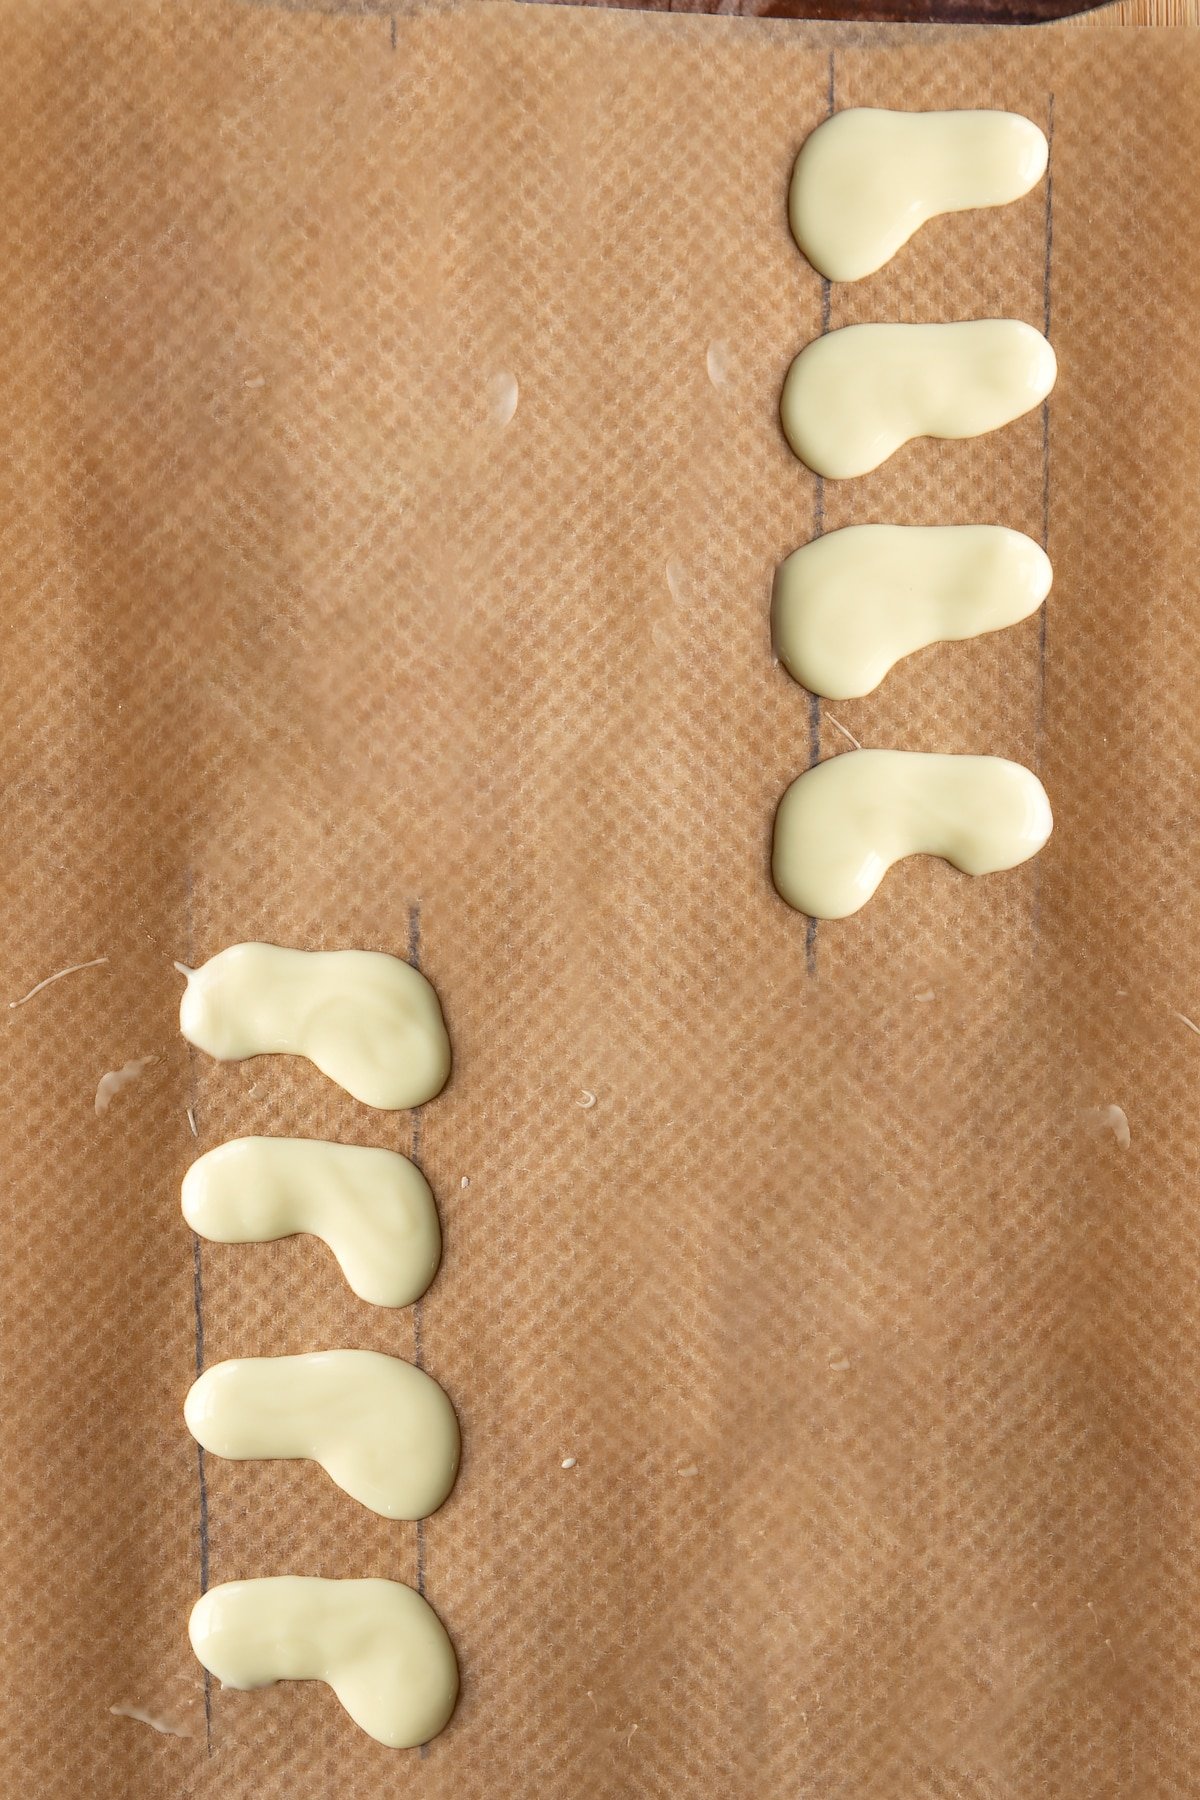 Eight white chocolate caterpillar legs piped onto baking paper.